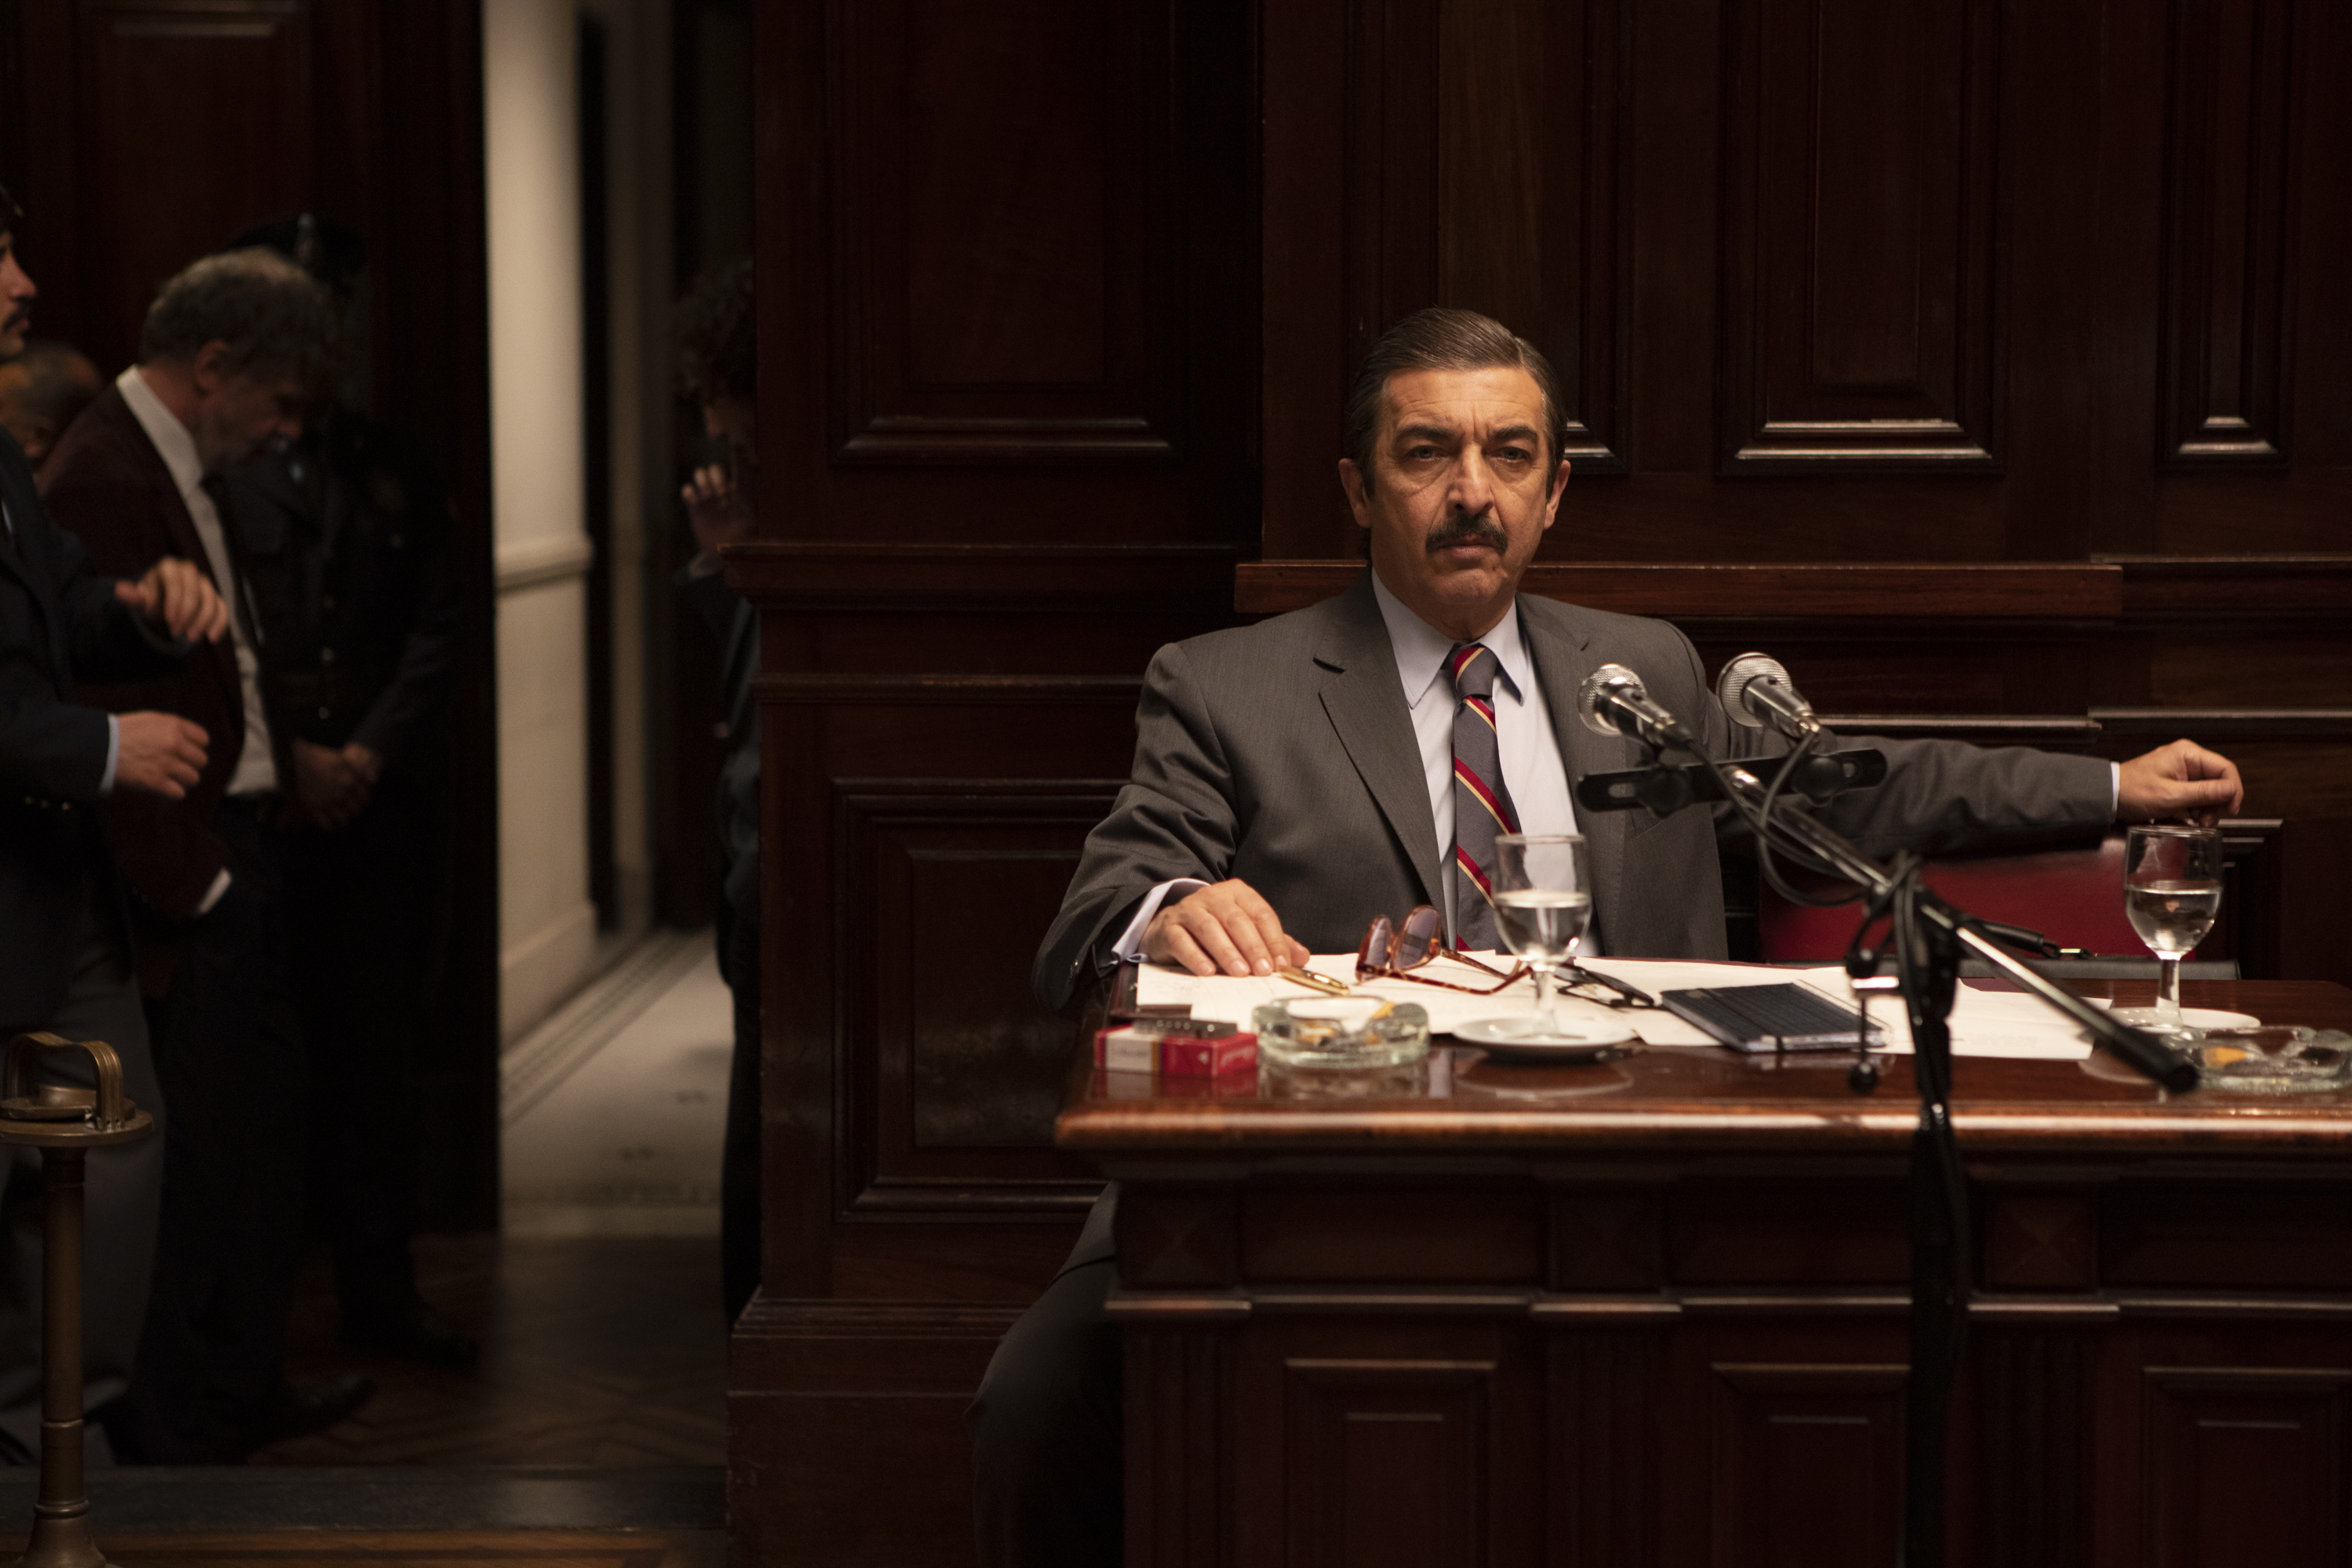 Ricardo Darin portrays prosecutor Julio César Strassera, who is responsible for investigating and prosecuting the nine commanders of the military juntas that ruled Argentina between 1976 and 1983